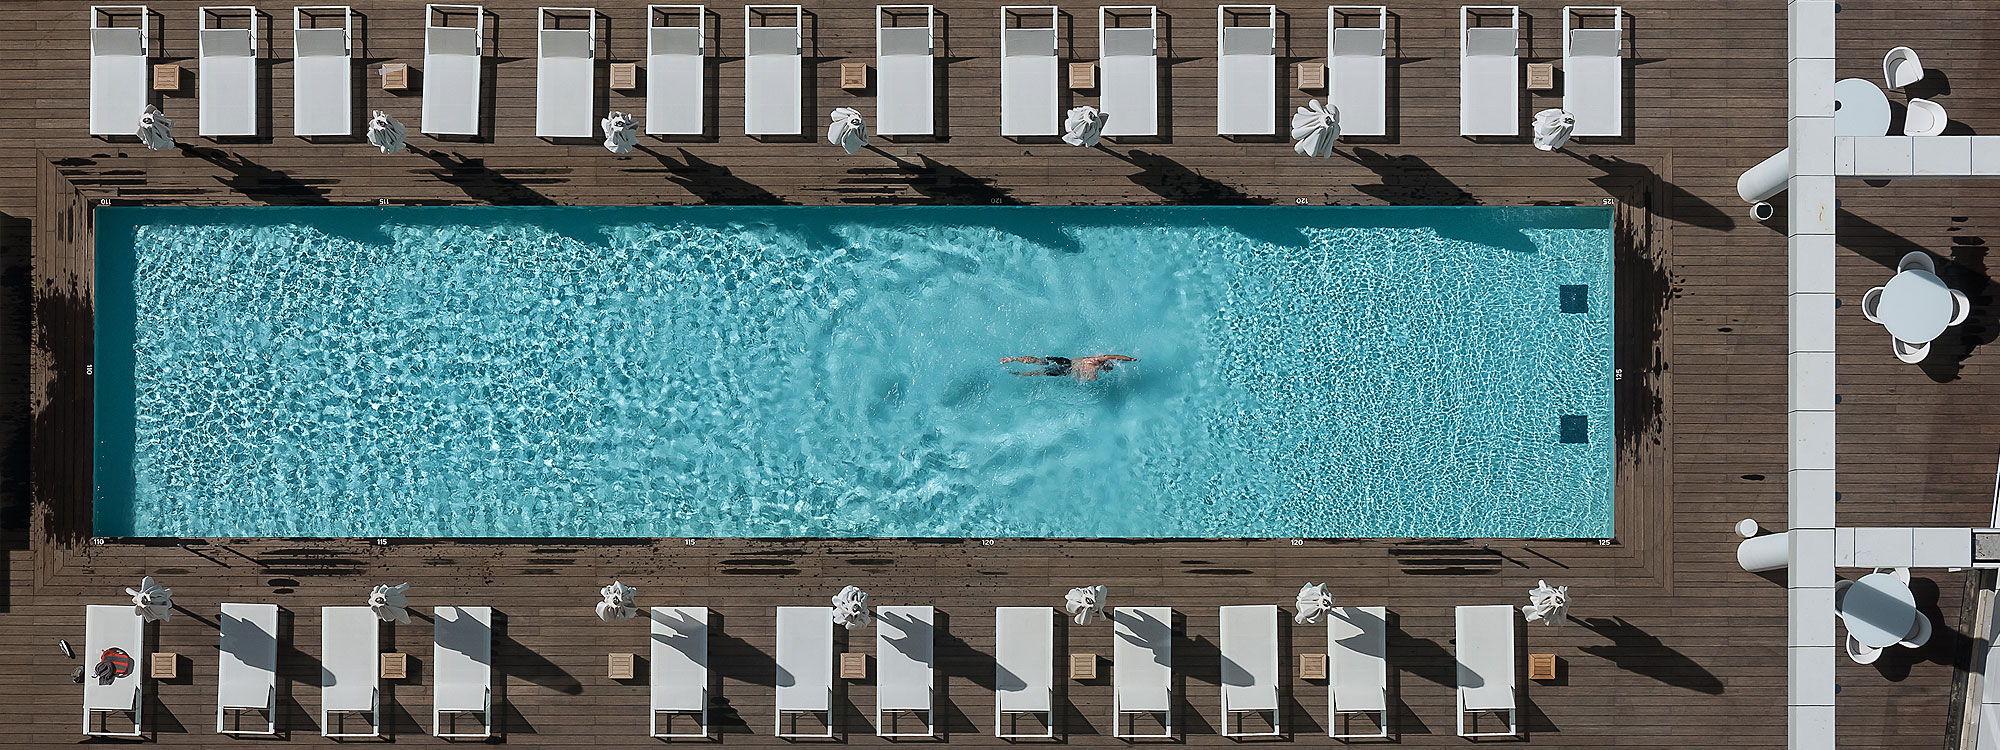 Image of aerial view of Israeli hotel swimming pool with multiple Siesta modern sunbeds on either side of the pool